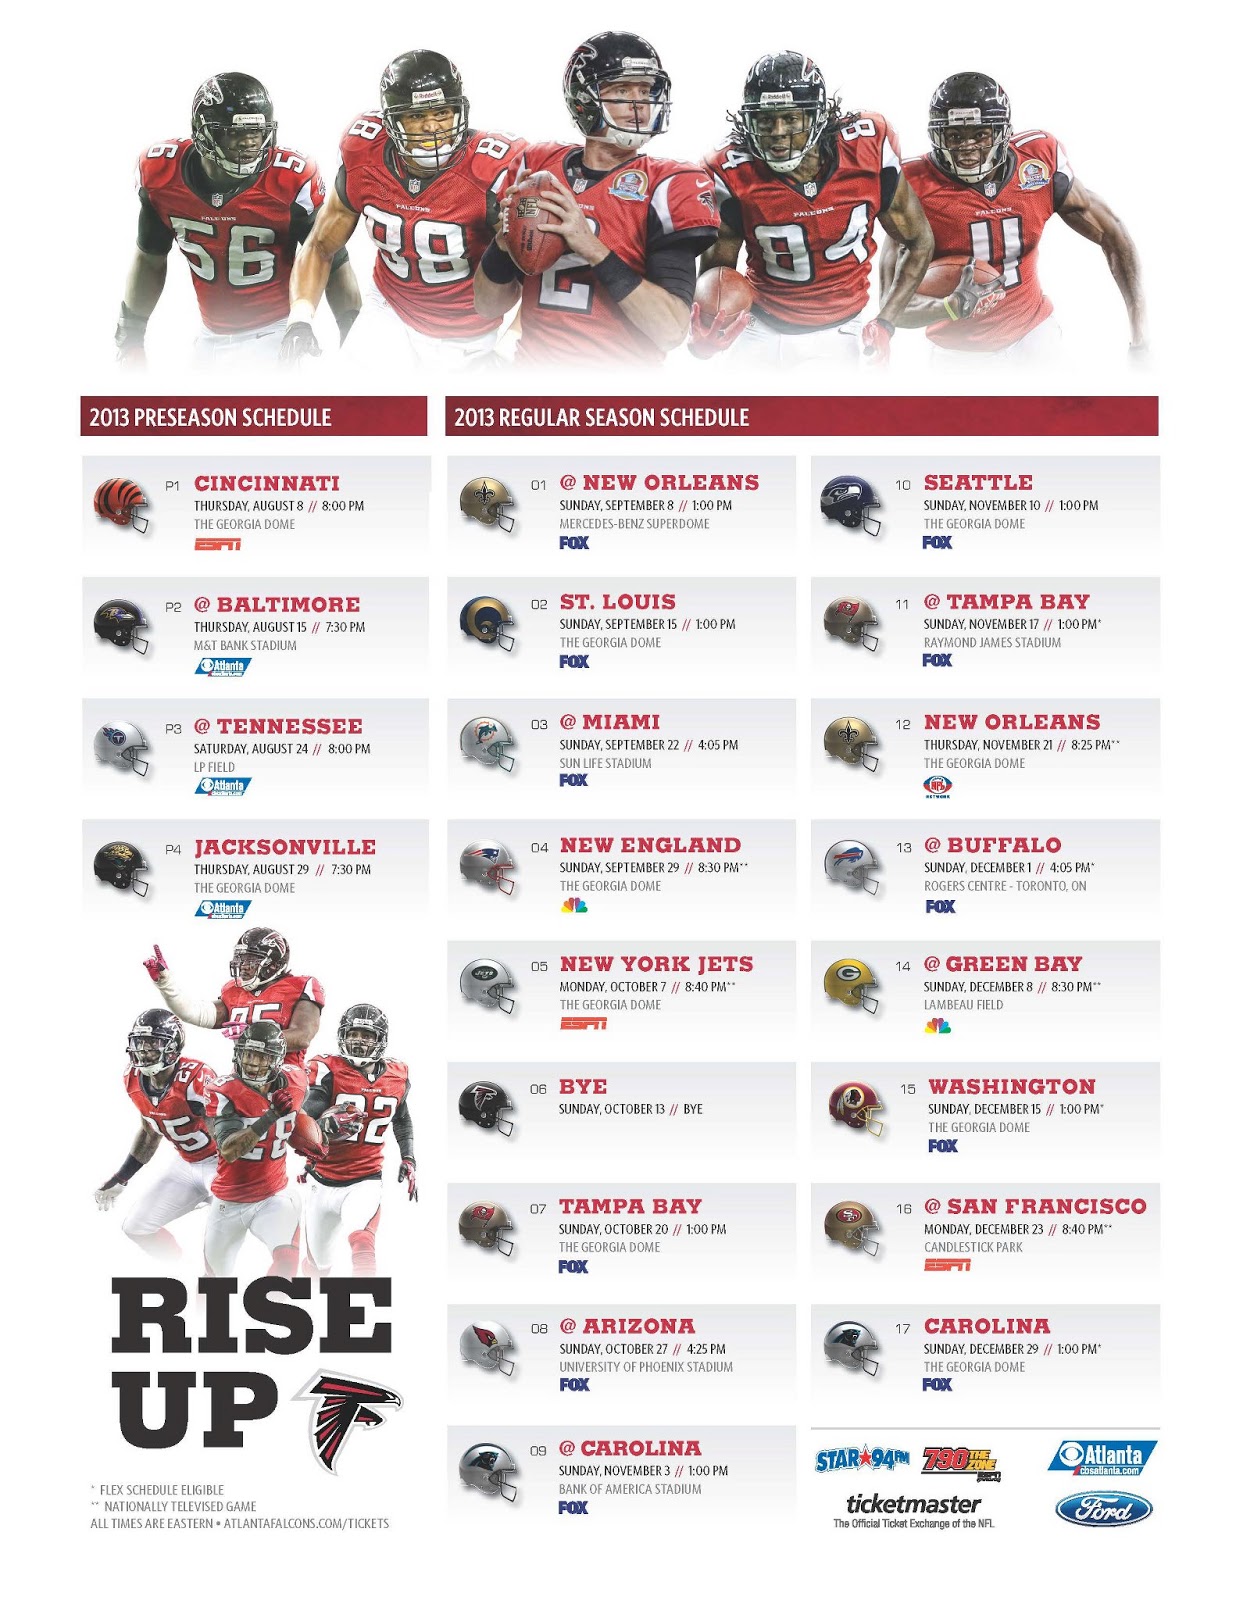 The 2013 Atlanta Falcons Schedule #RiseUp - Planet of the Sanquon